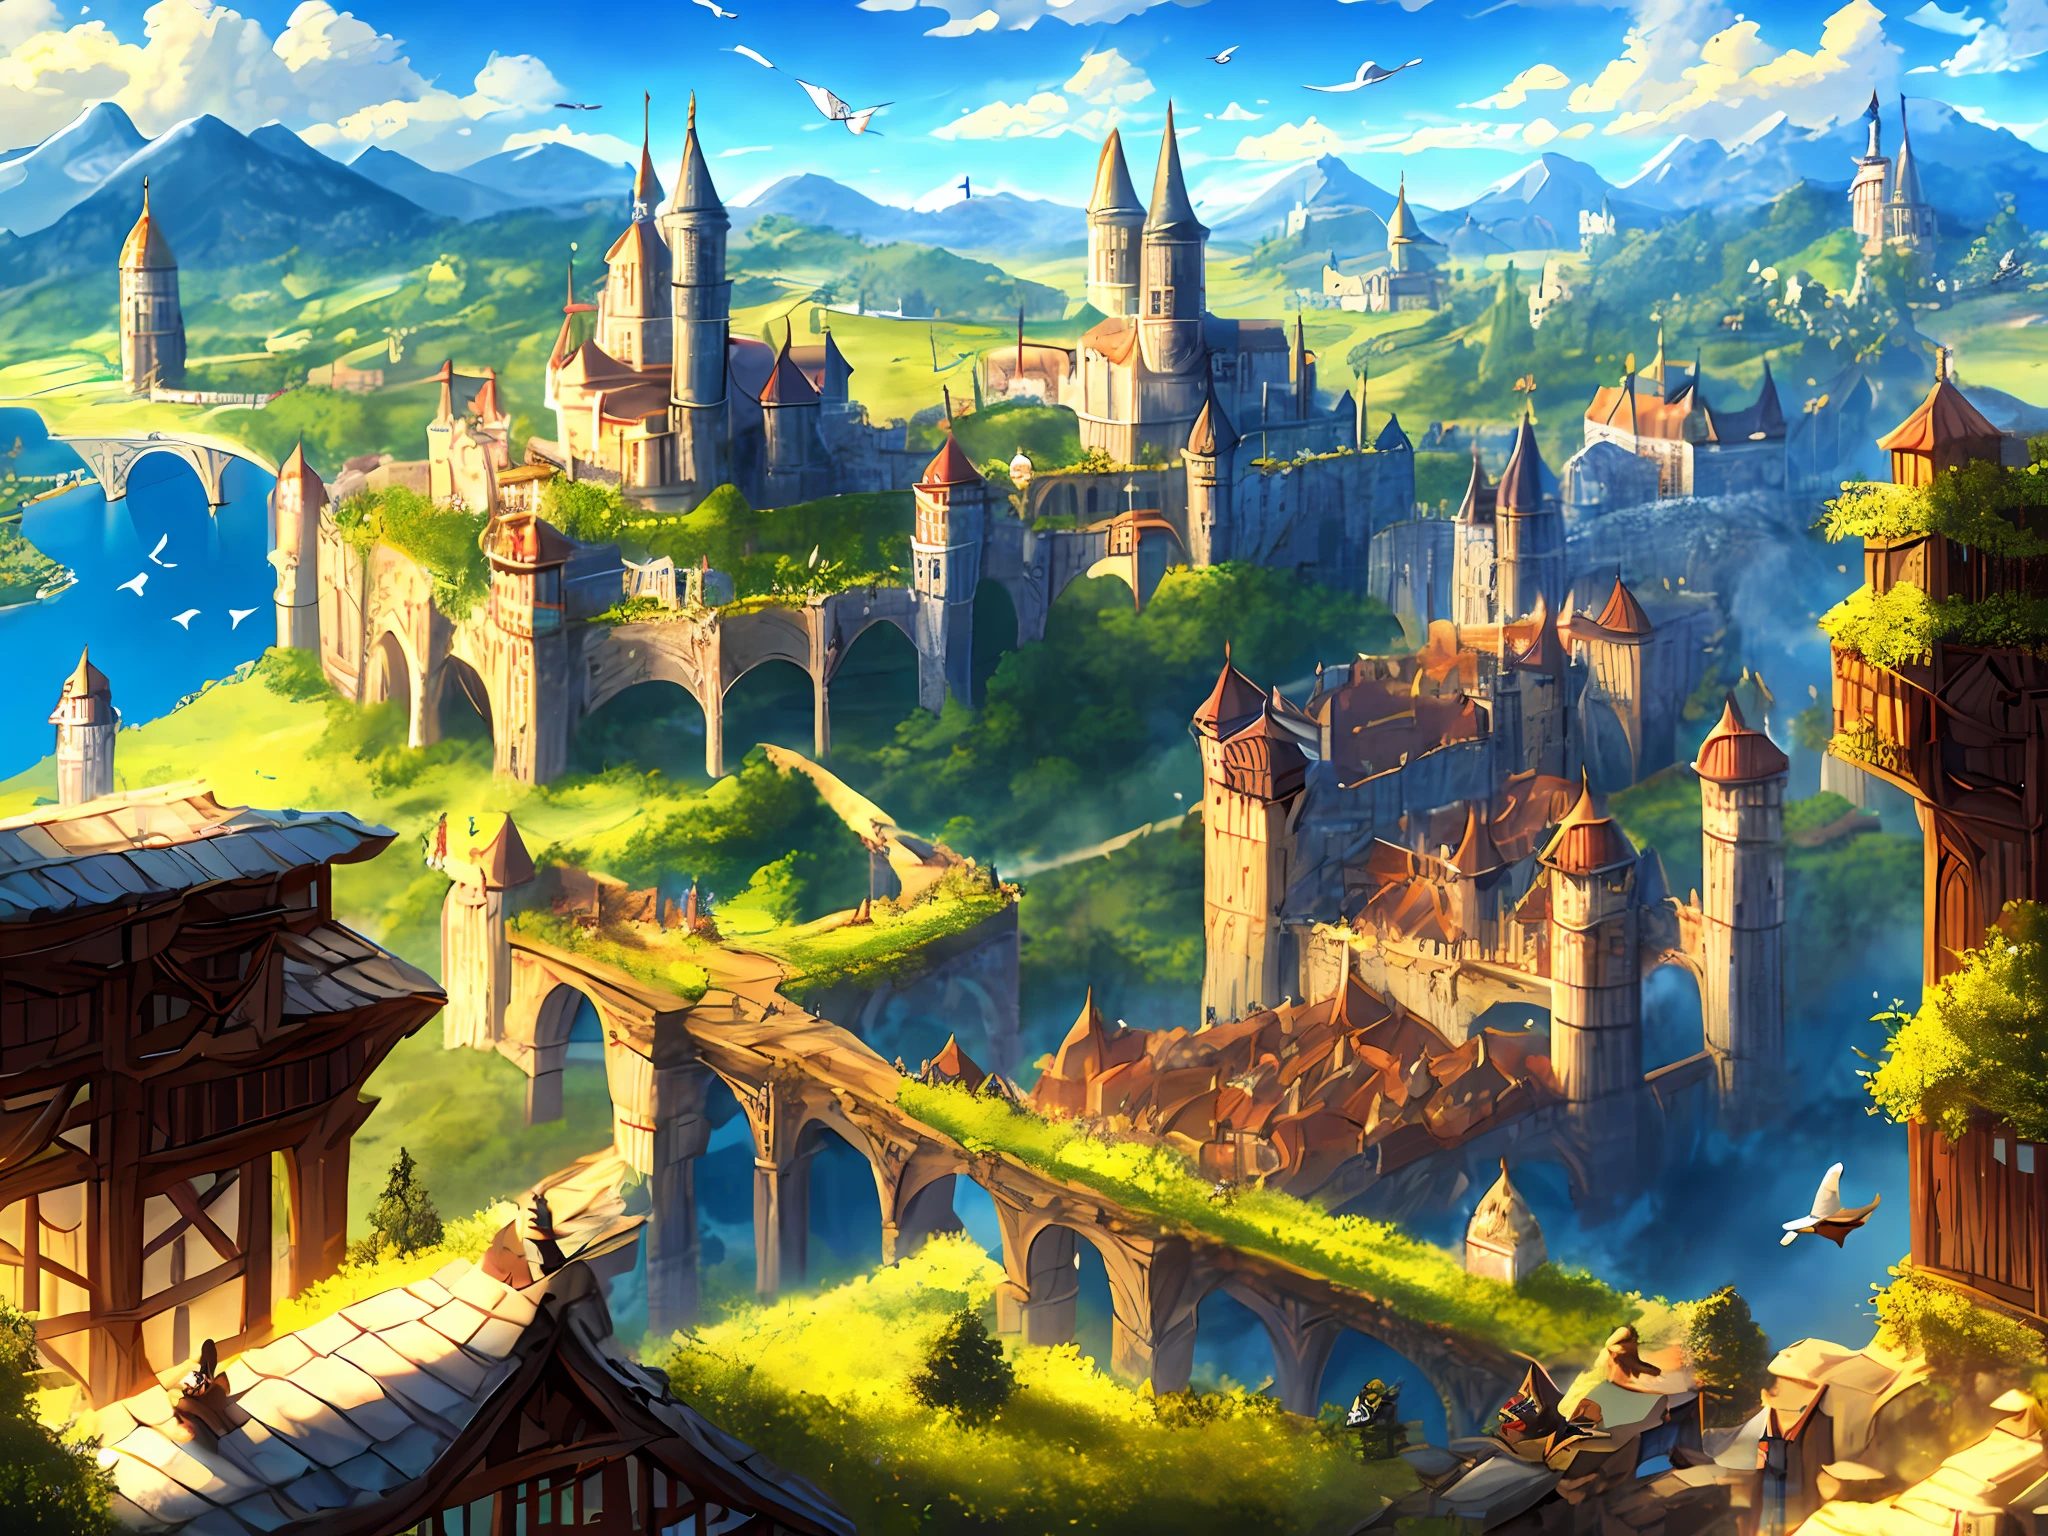 medieval kingdom. sunny morning. 8k resolution. ratio 3:2. very high drawing skills. bird's eye viewpoint. very stunning view. amazing light effects. thick medieval fantasy illustrations. very large area.